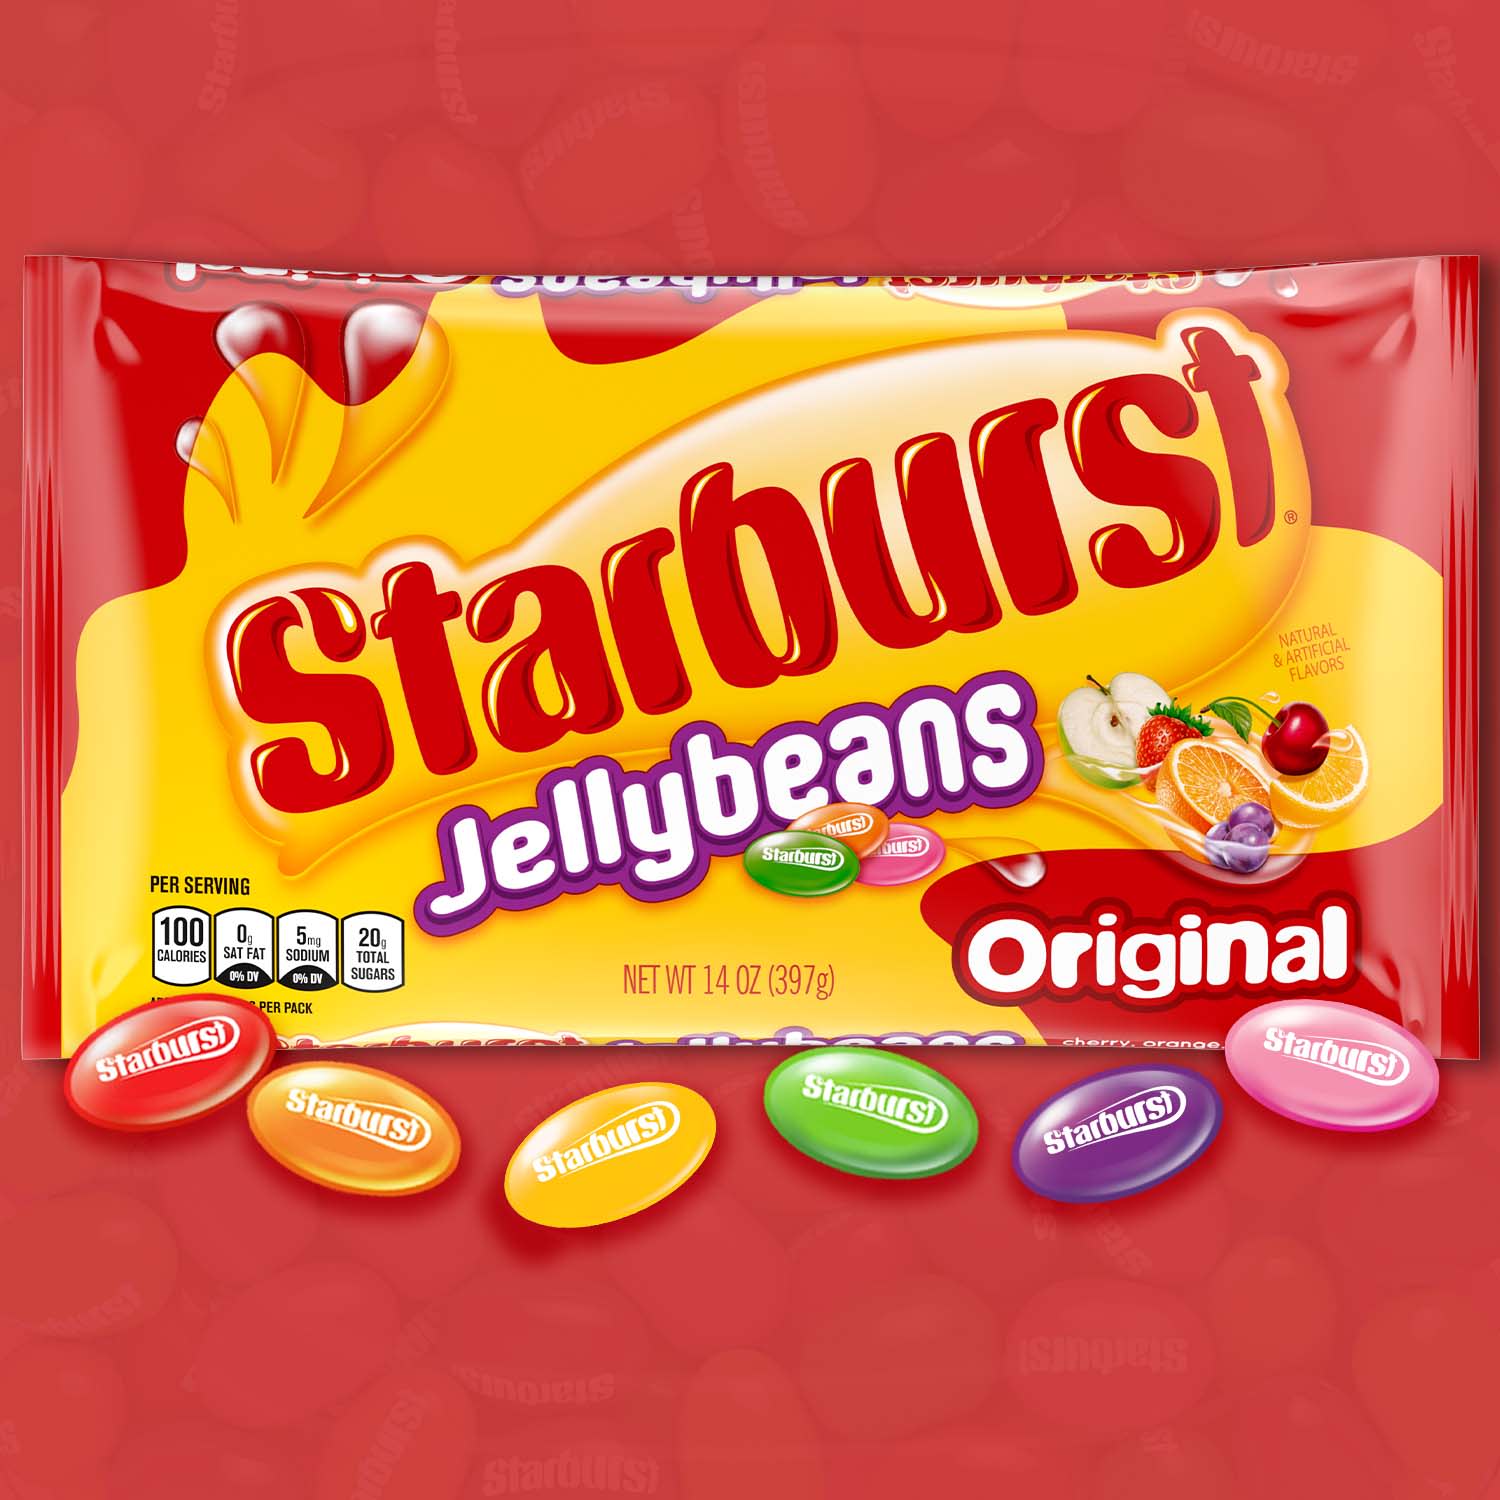 Starburst Original Jelly Beans Chewy Candy - 14 oz Bag - image 3 of 15